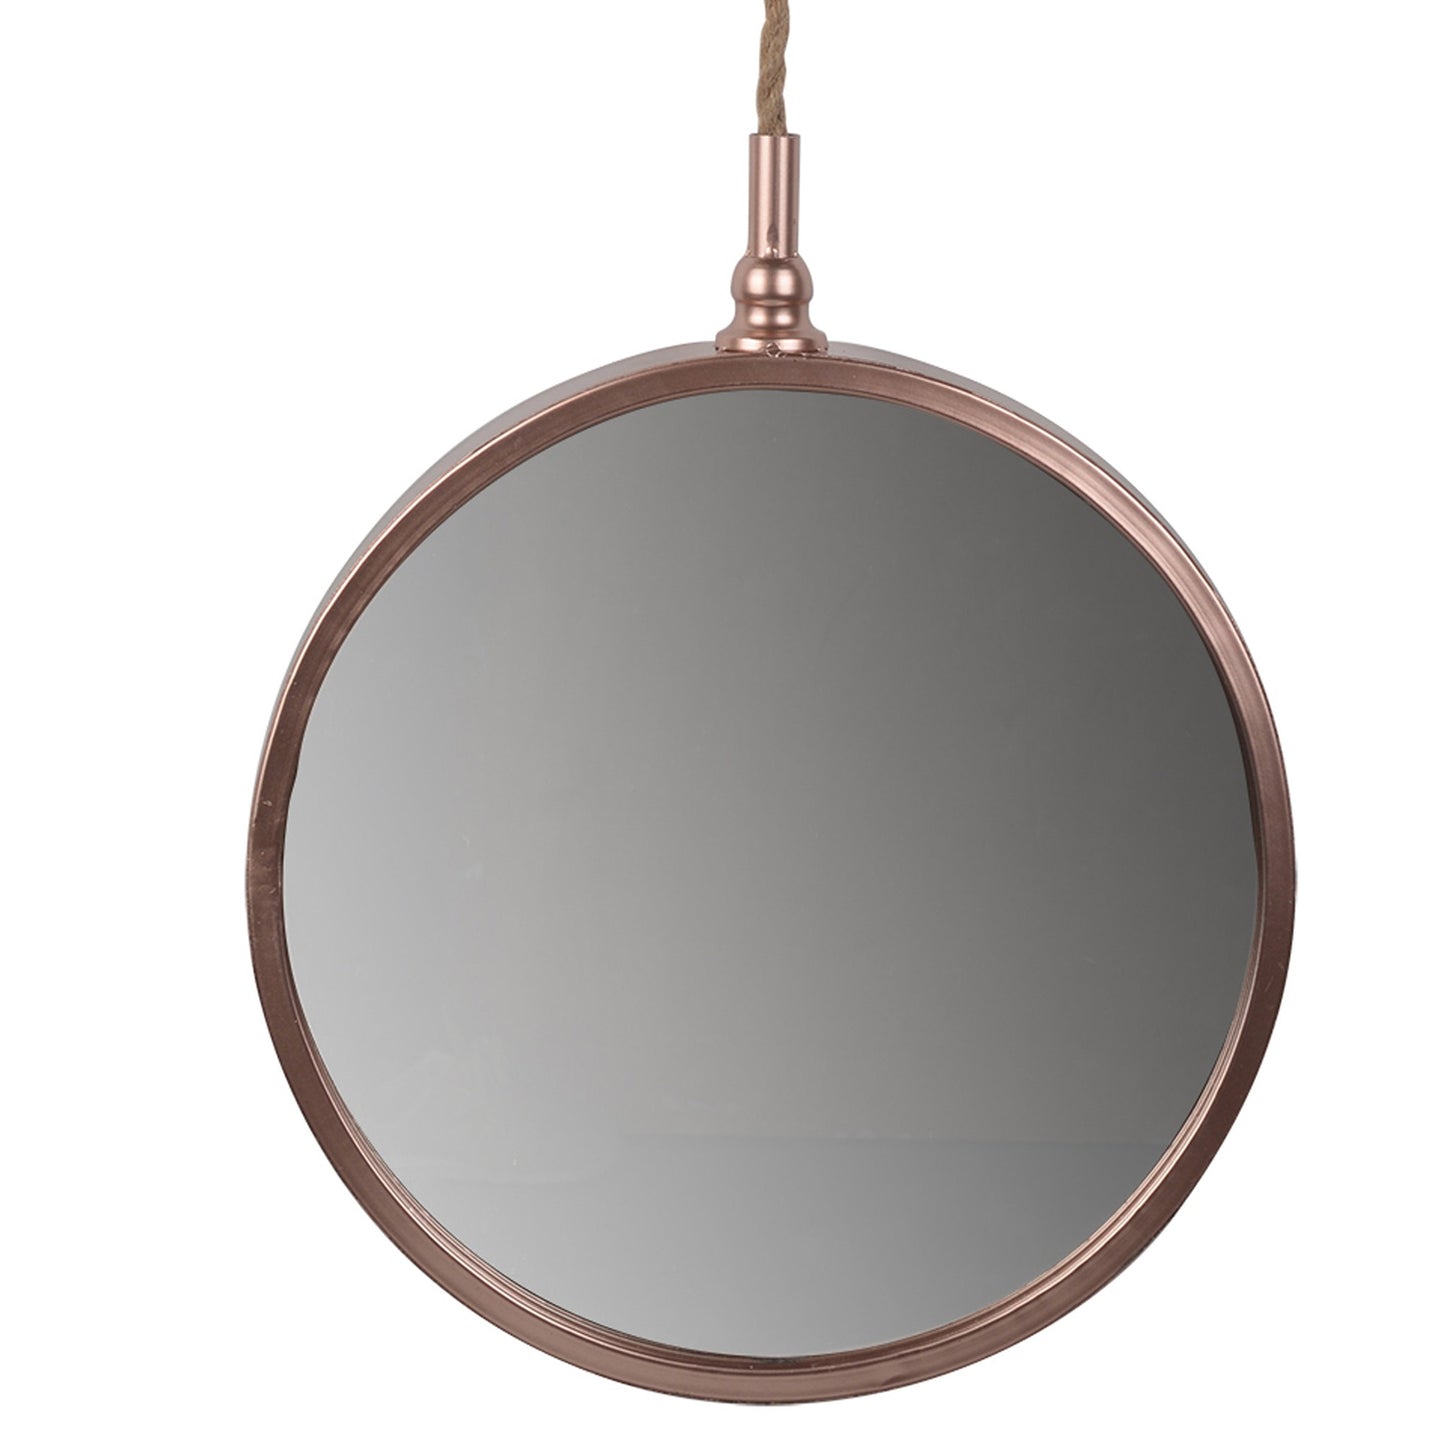 Benzara 43" Copper Medium Round Metal Frame Wall Mirror With Attached Rope Hanging